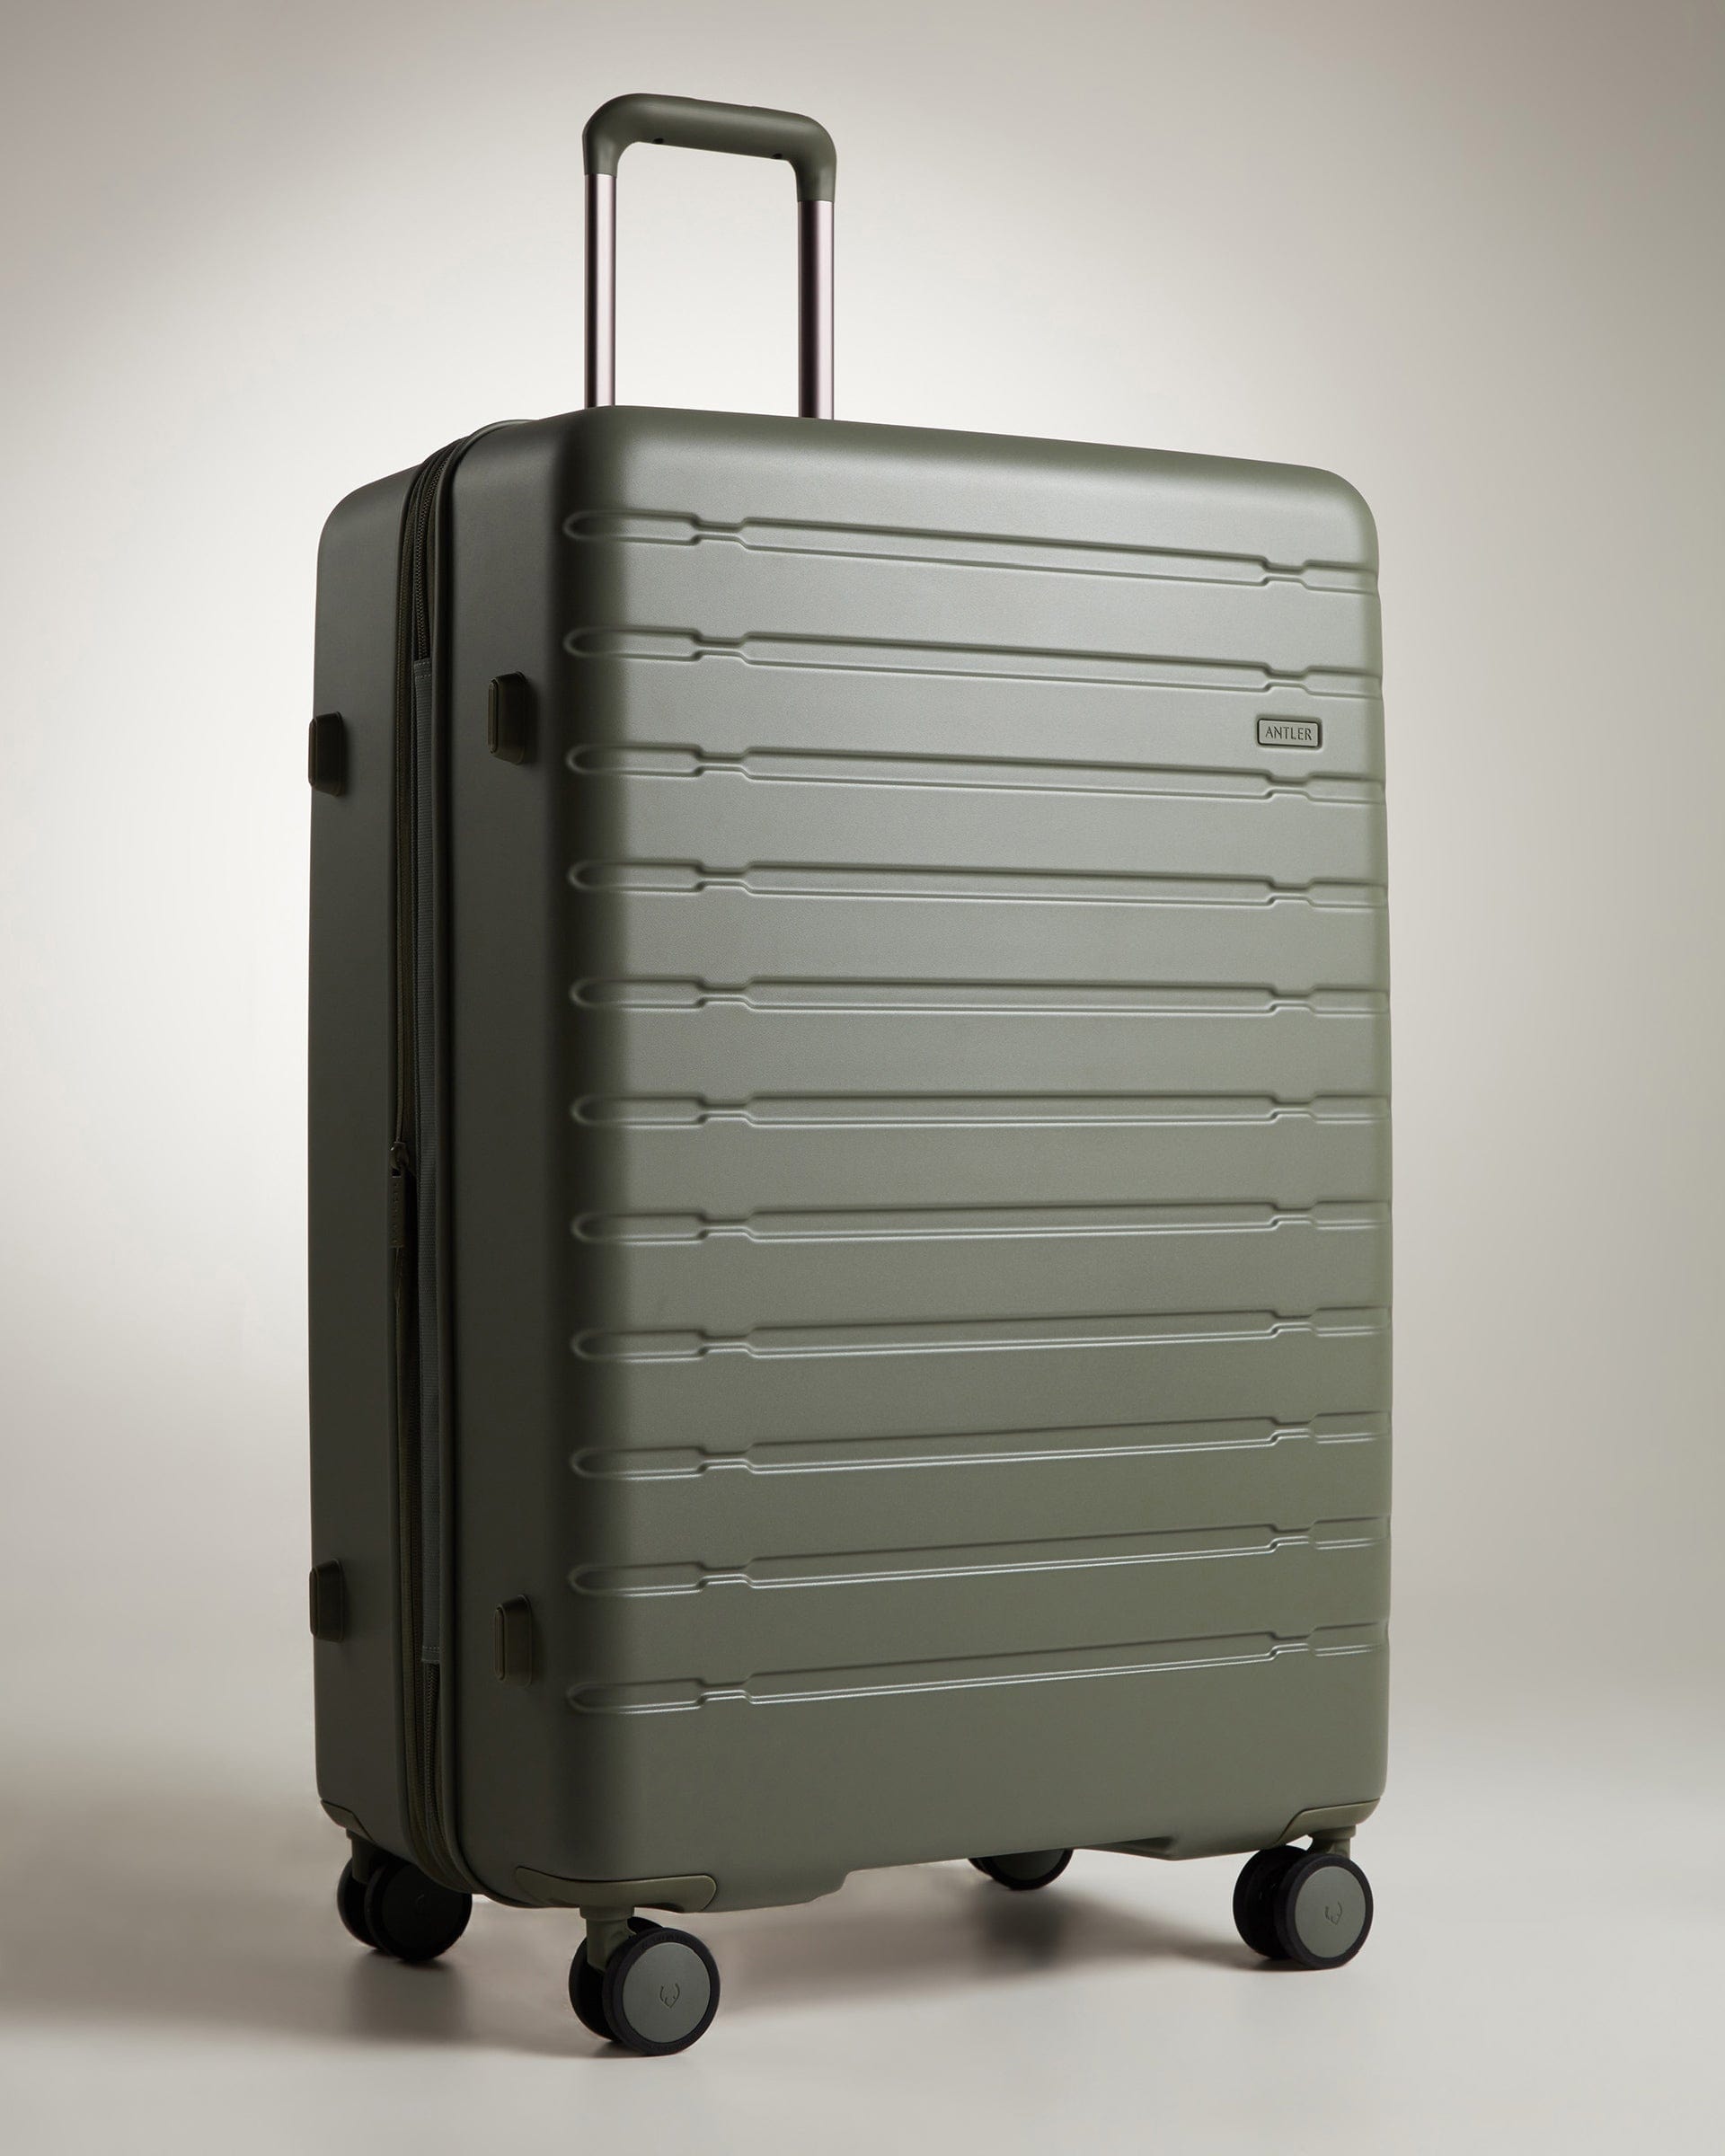 View Antler Stamford 20 Large Suitcase In Field Green Size 345cm x 54cm x 815cm information